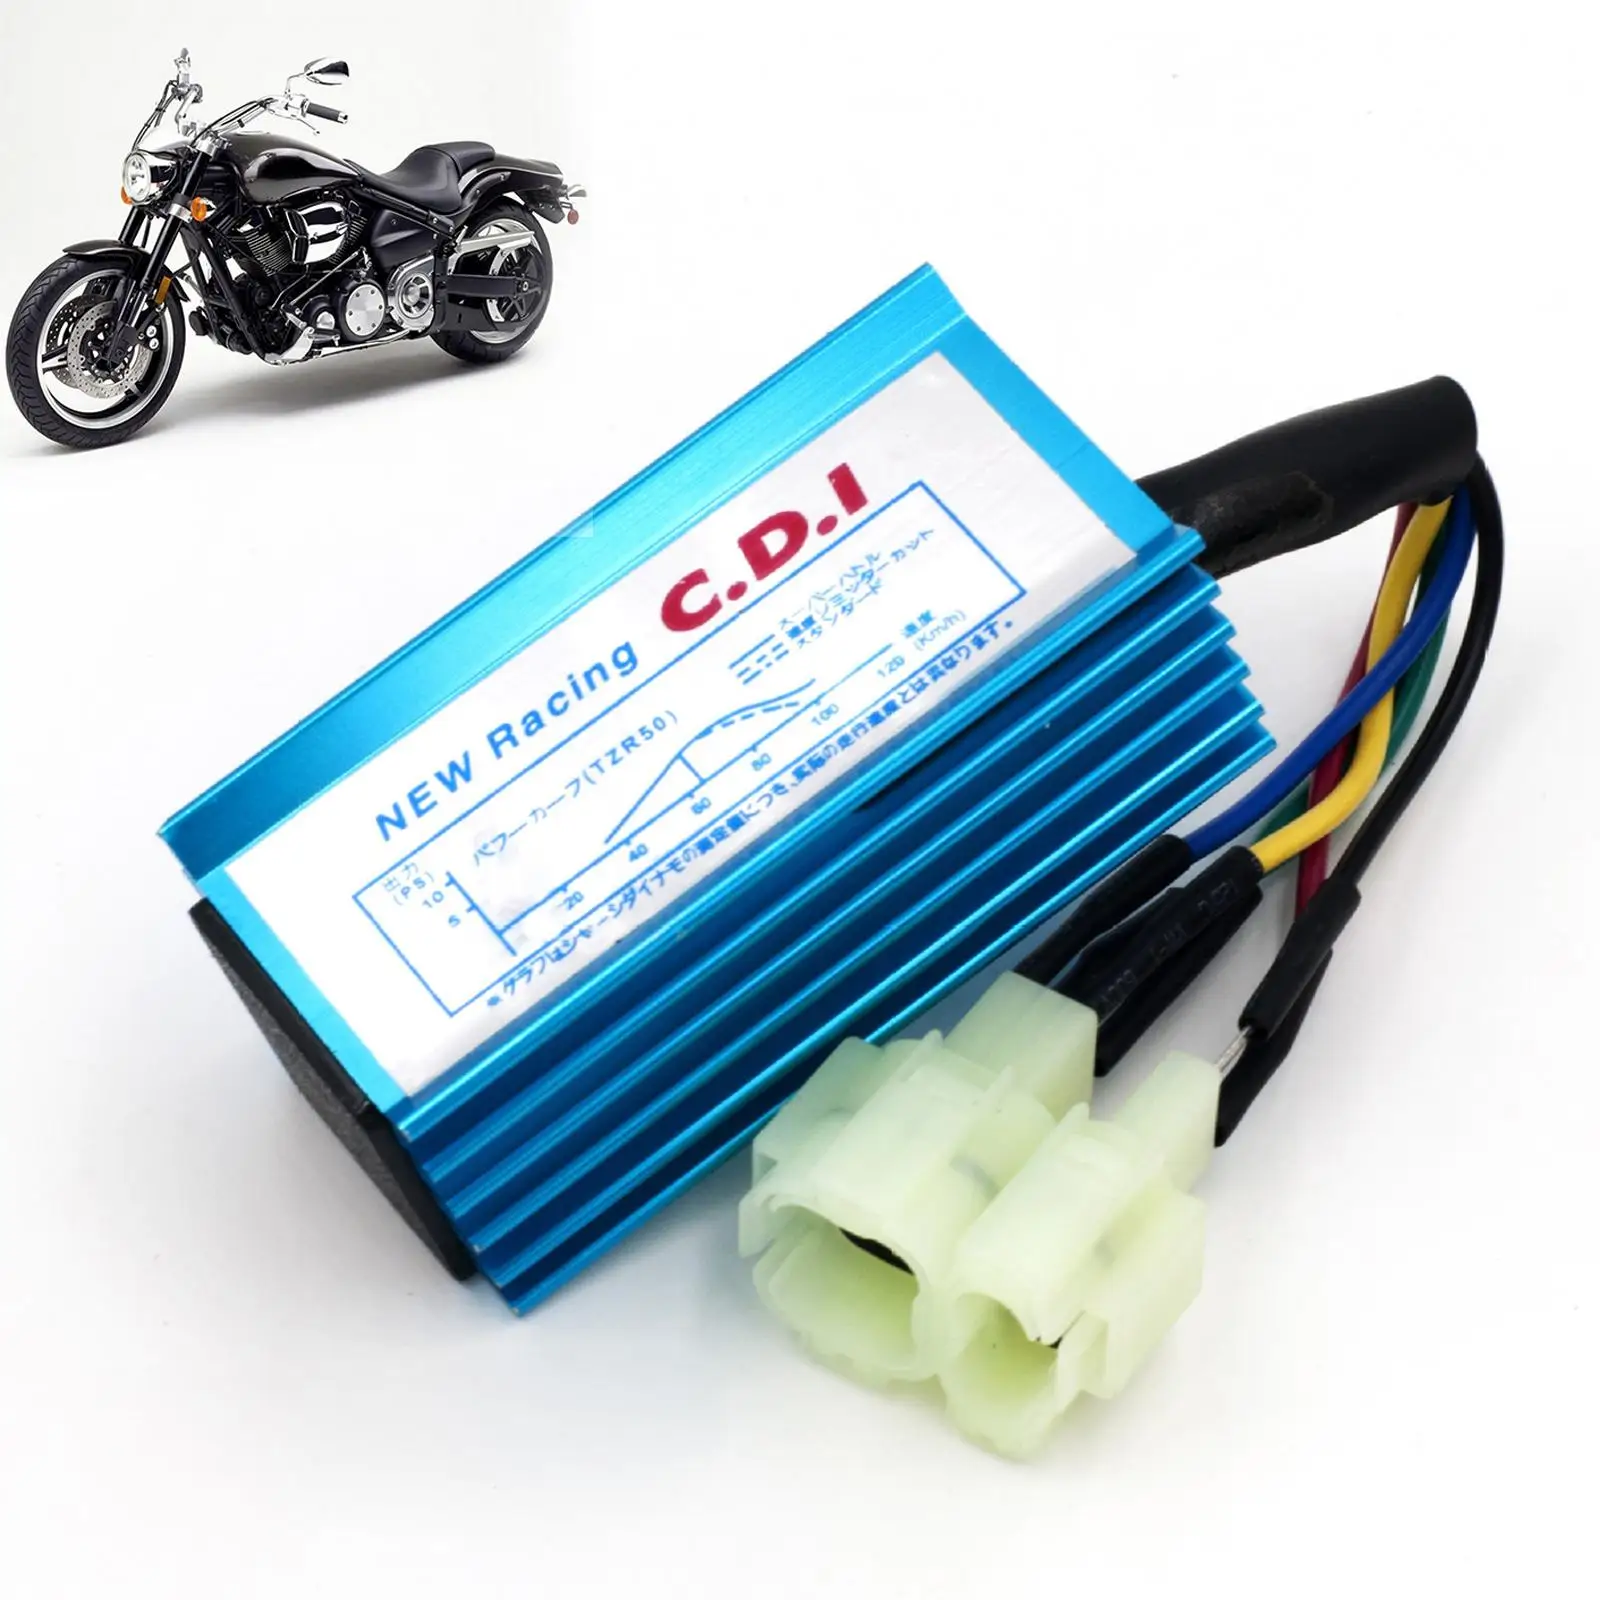 Gy6  Cdi Box with Ignition Coil for Gy6 50cc-250cc Series Engines